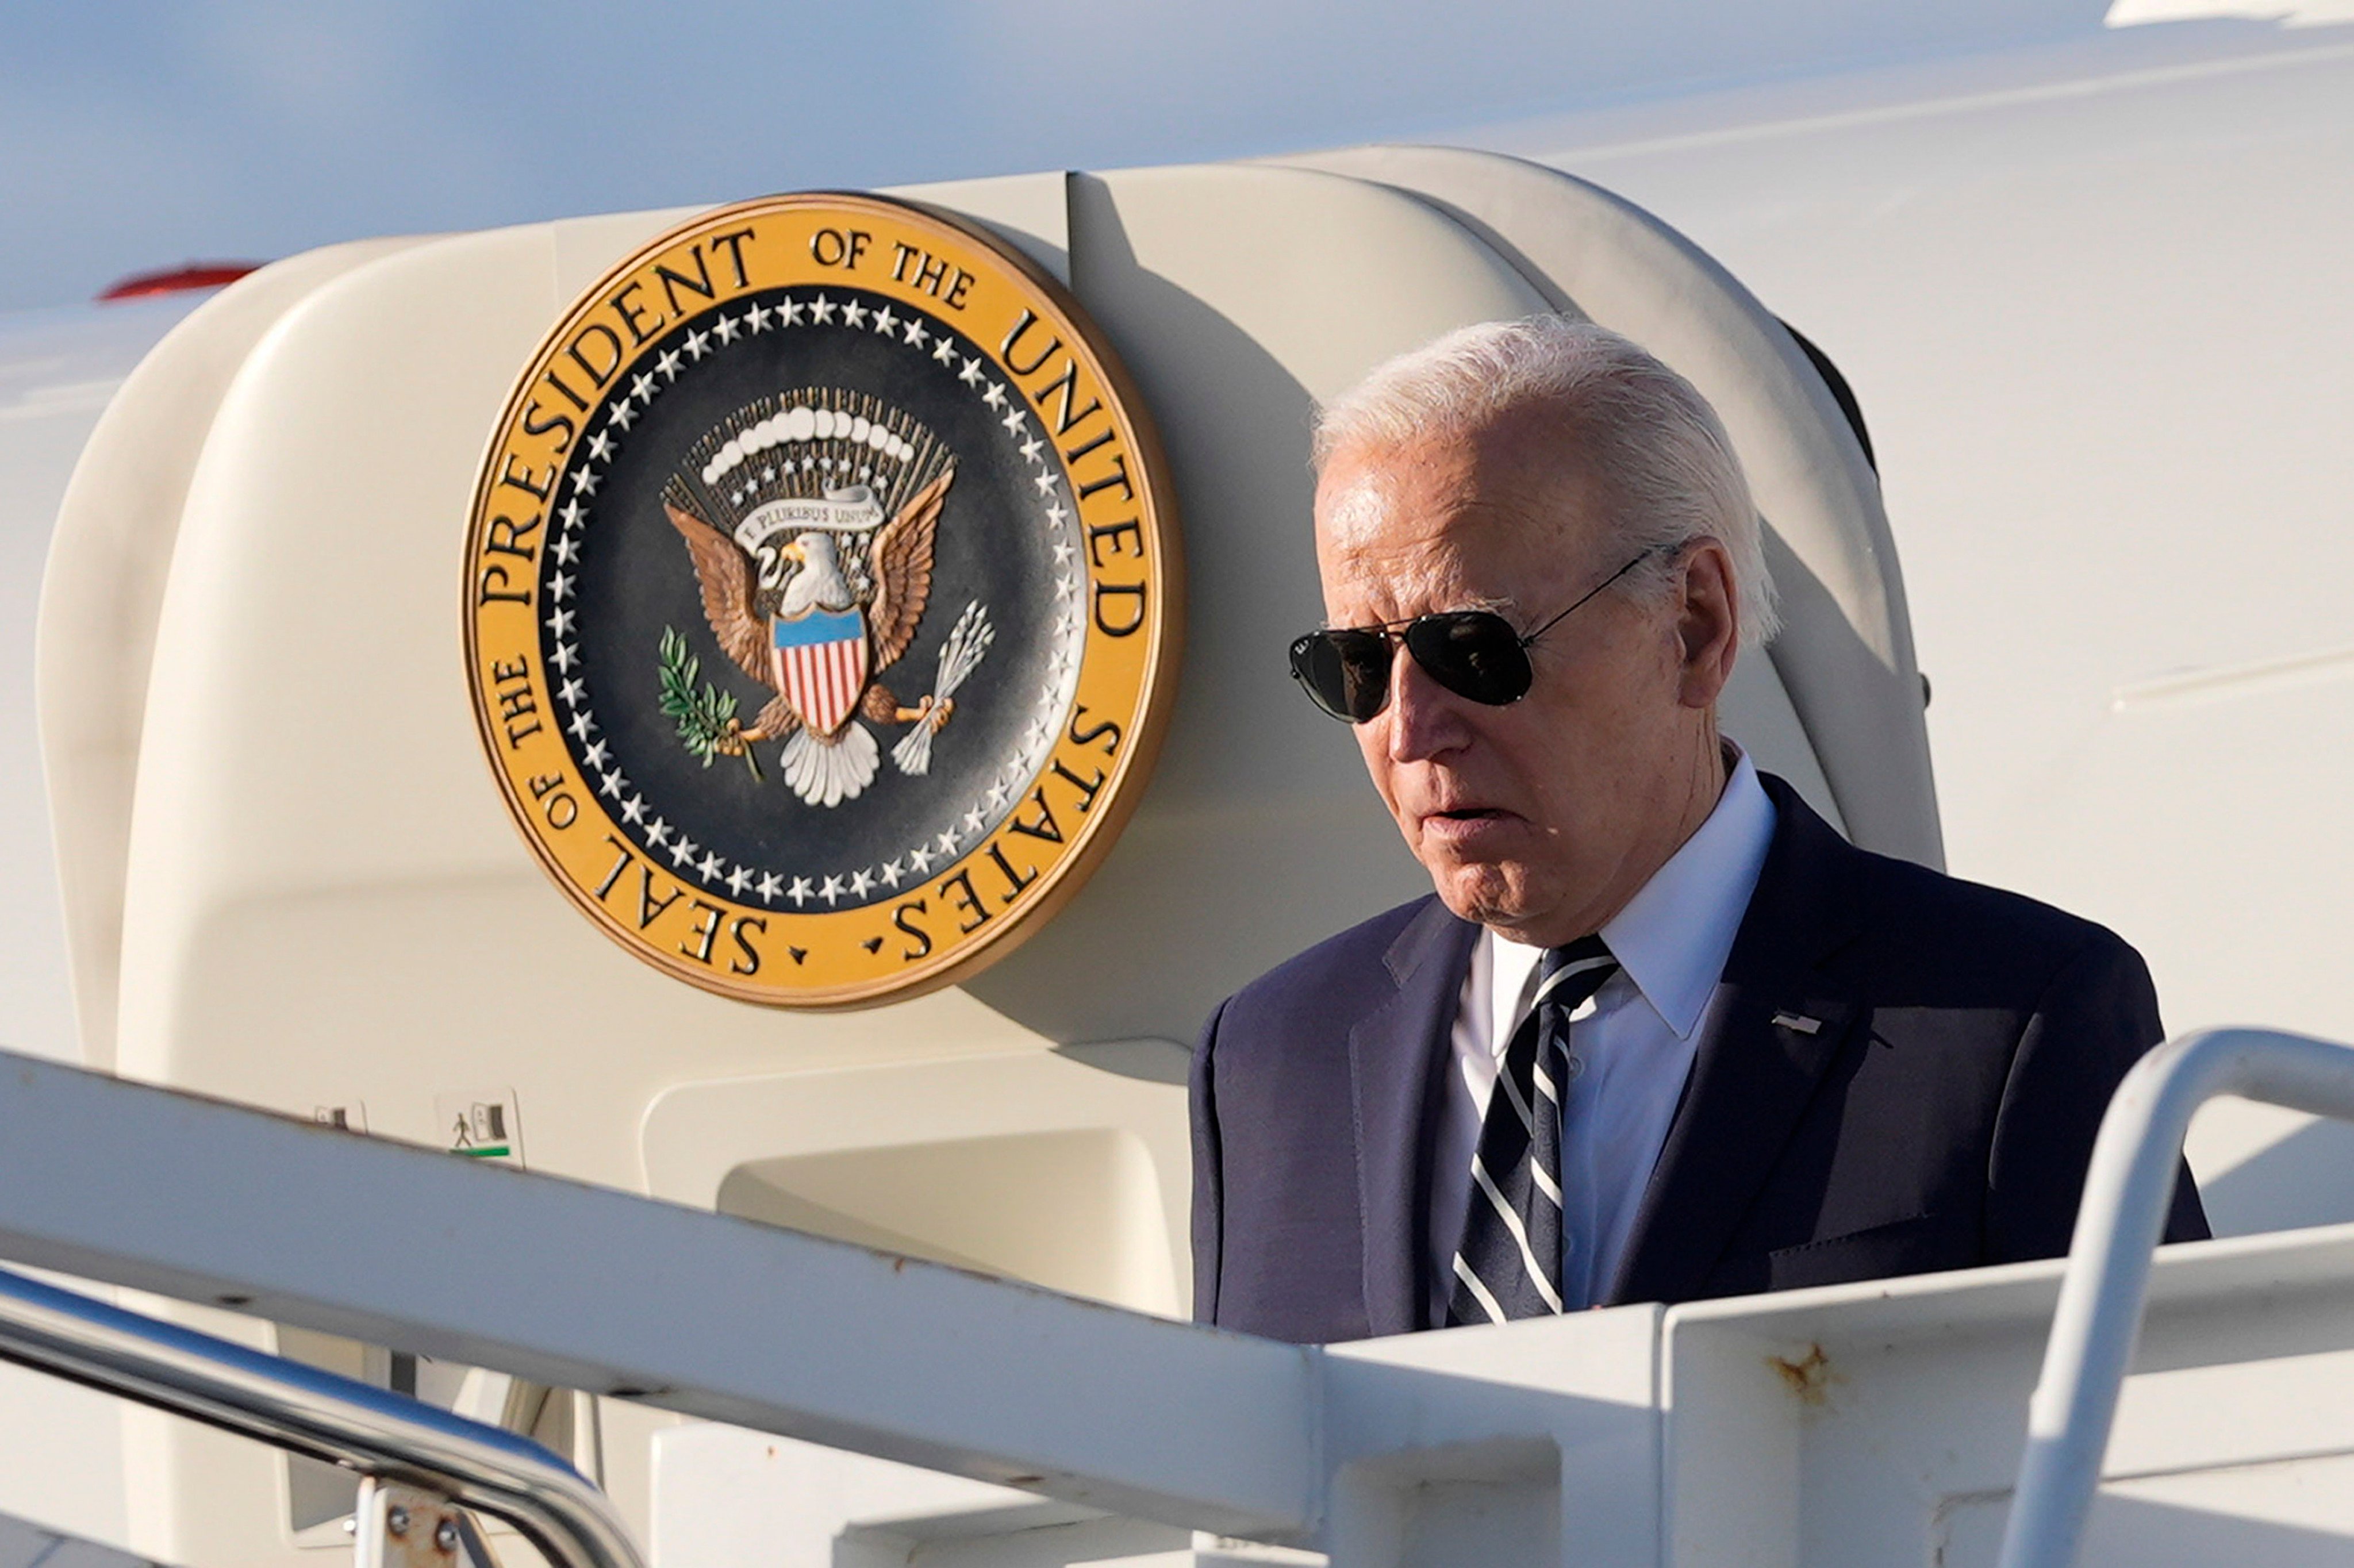 President Joe Biden arrives on Air Force One at Delaware Air National Guard Base in New Castle, Delaware on Friday. Photo: AP